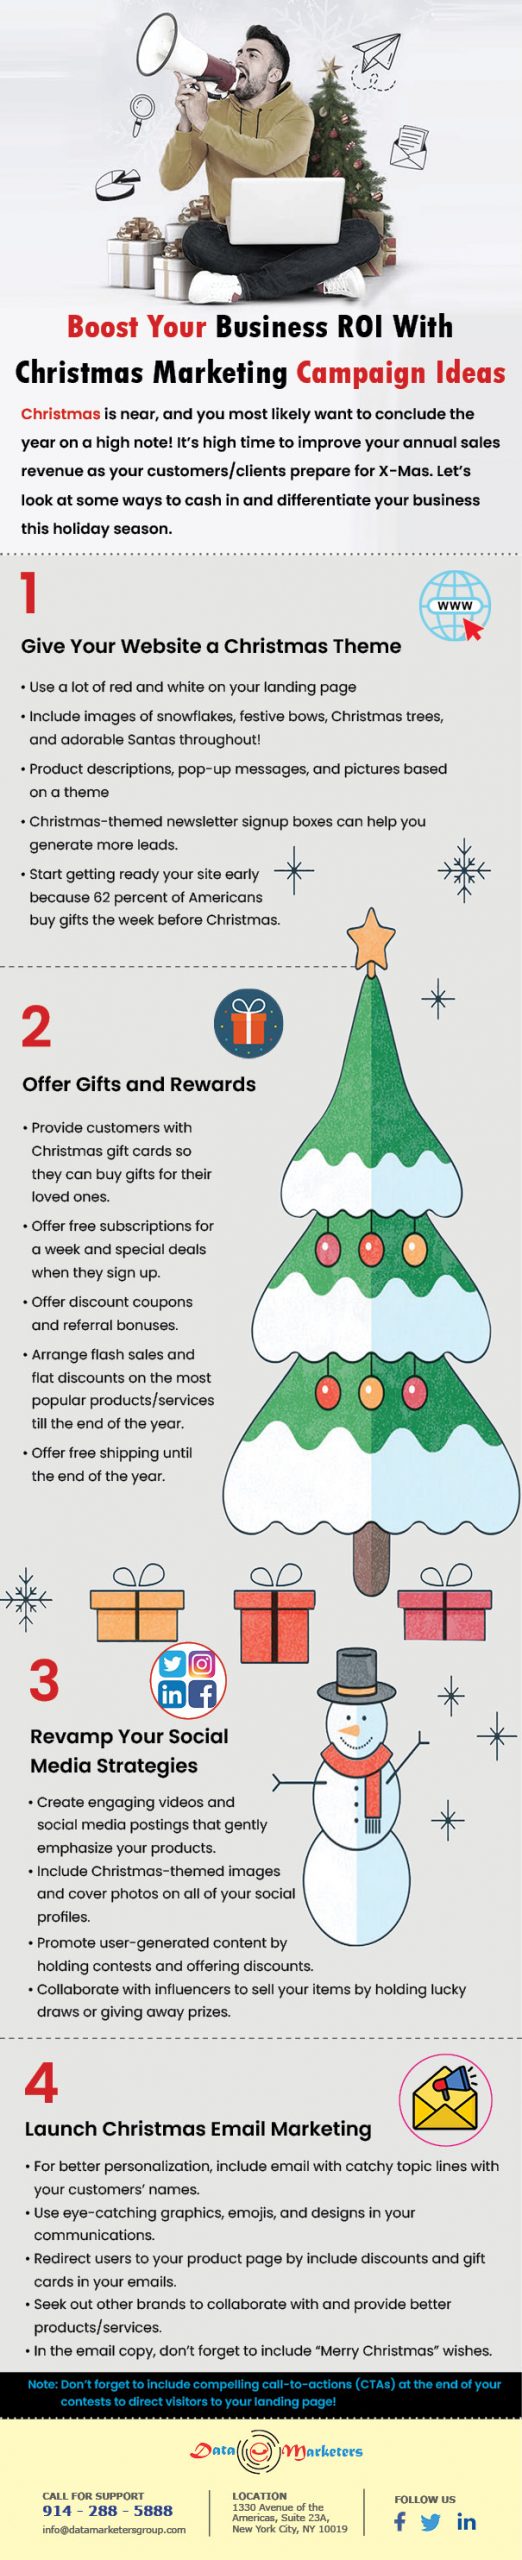 Boost Your Business ROI With Christmas Marketing Campaign Ideas | Data Marketers Group